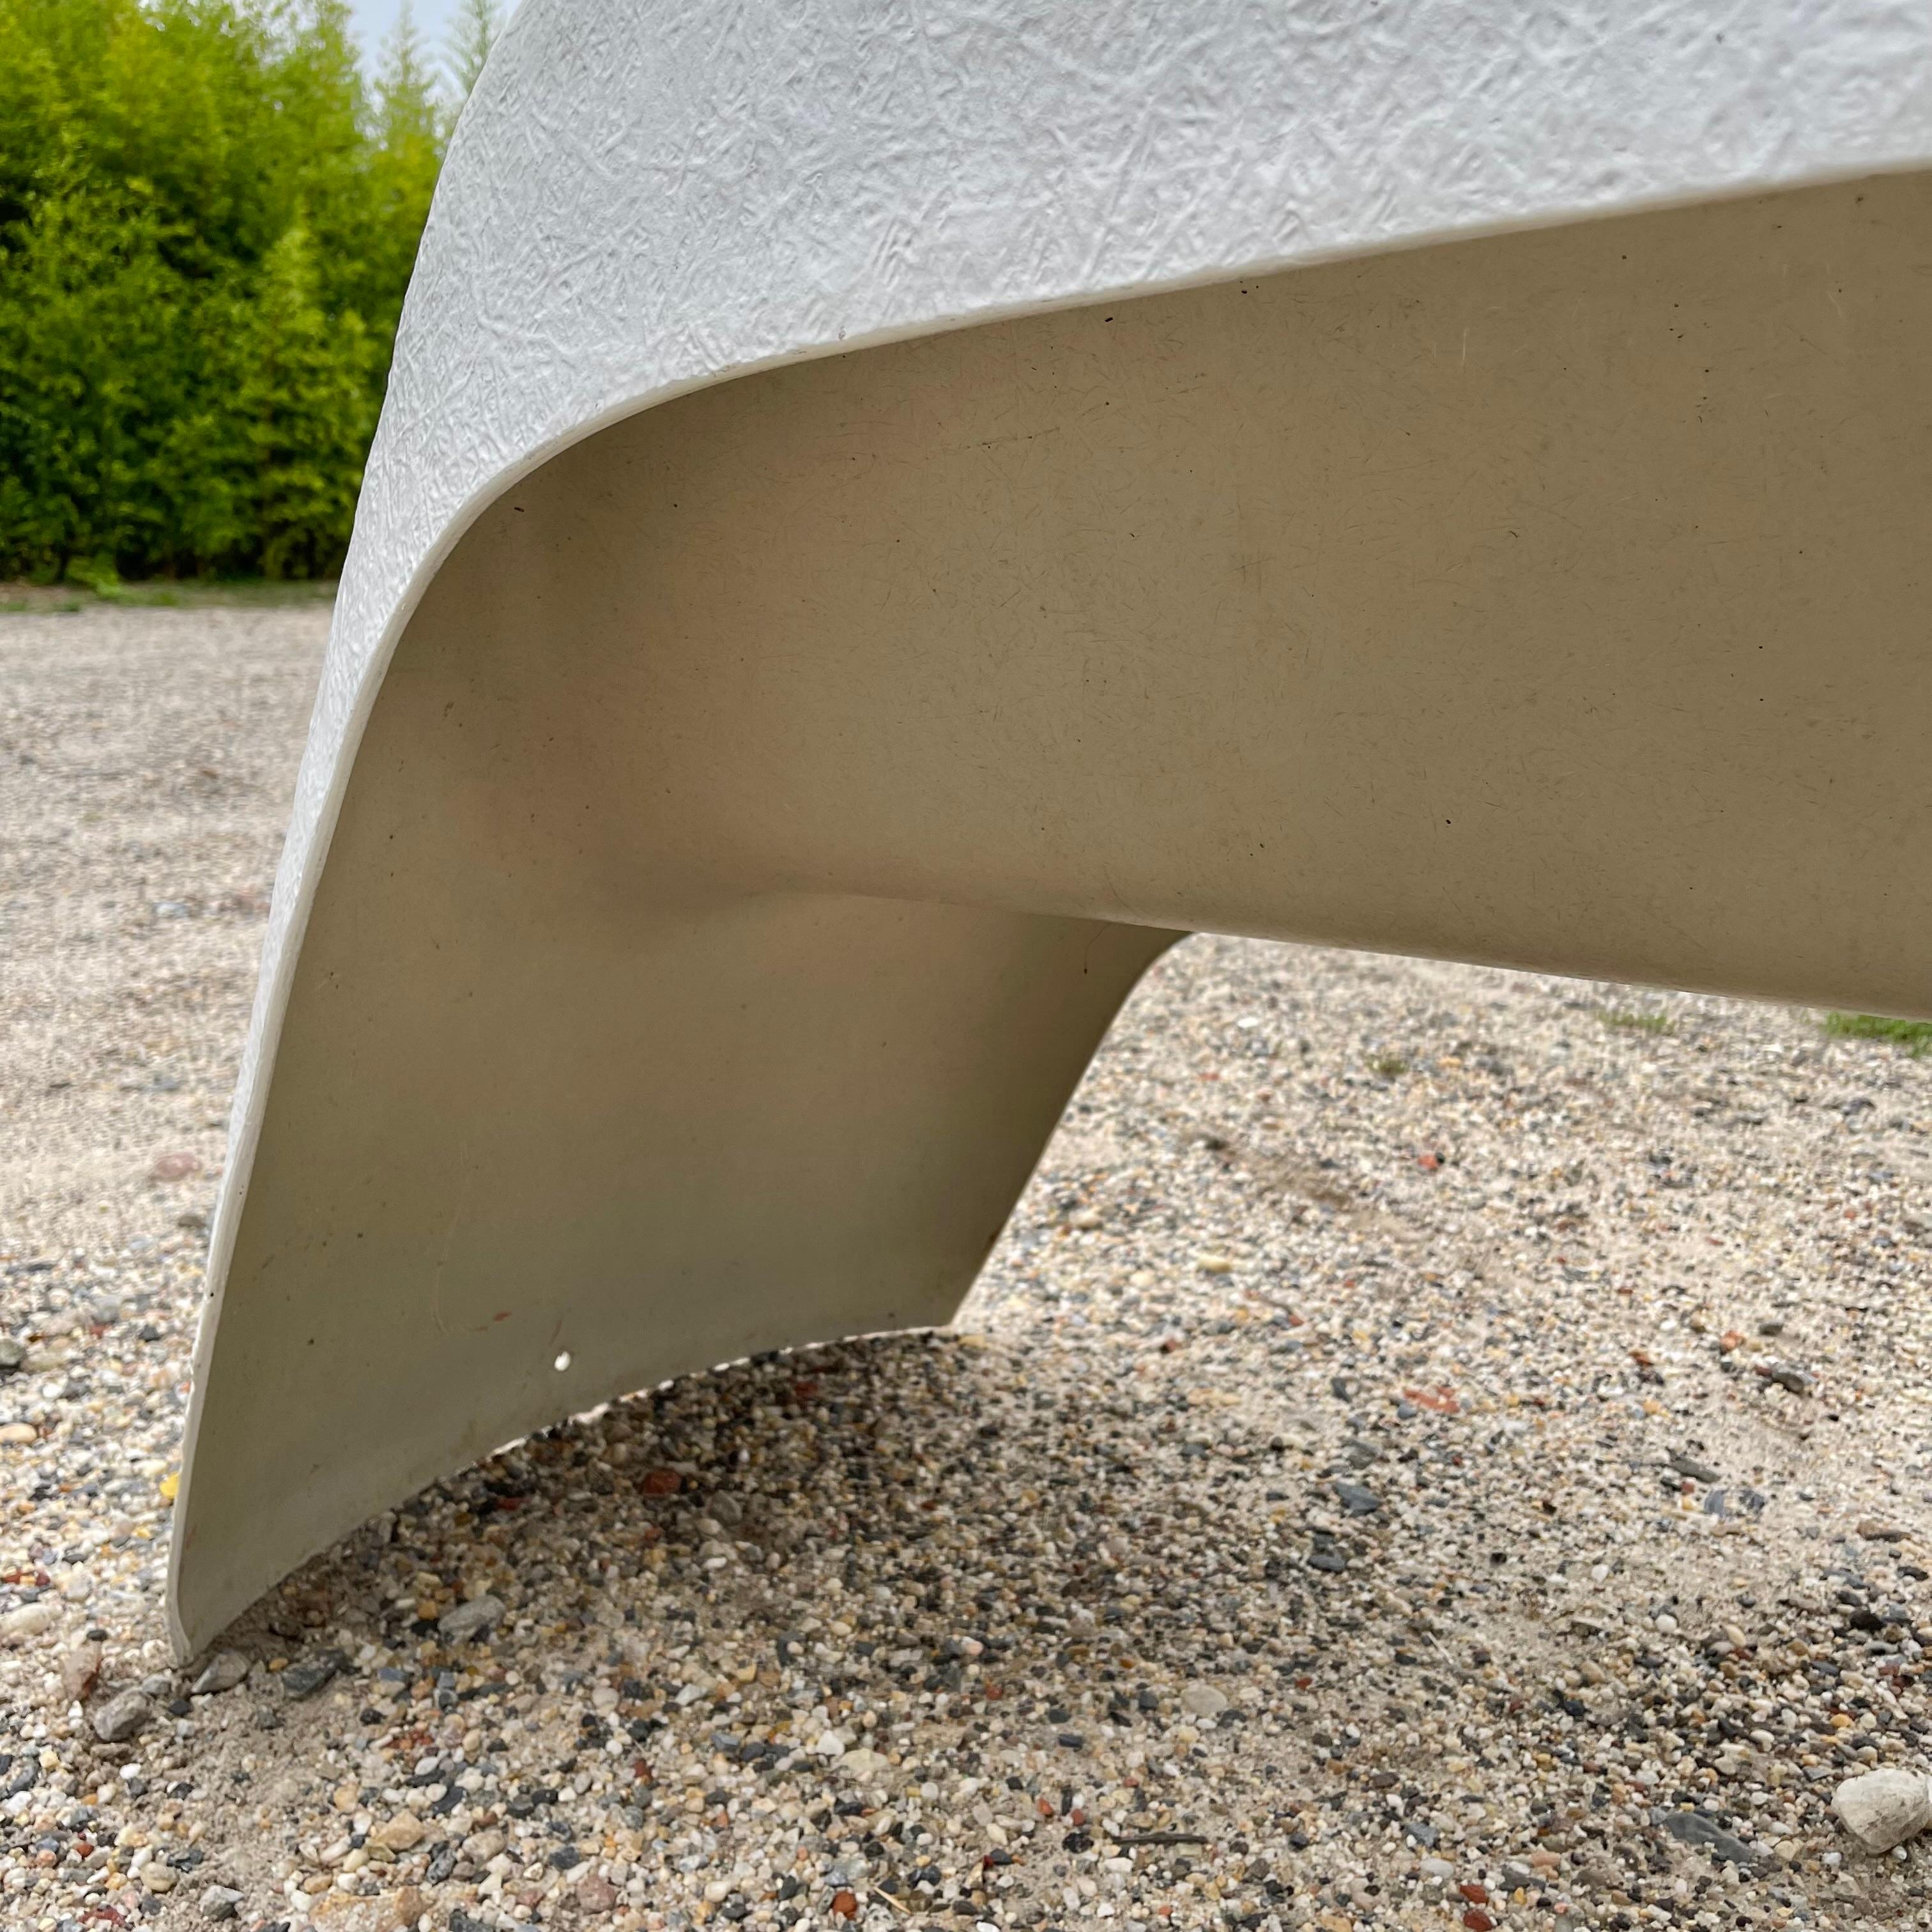 Sculptural Outdoor Fiberglass Bench by Walter Papst, 1960s Germany For Sale 7